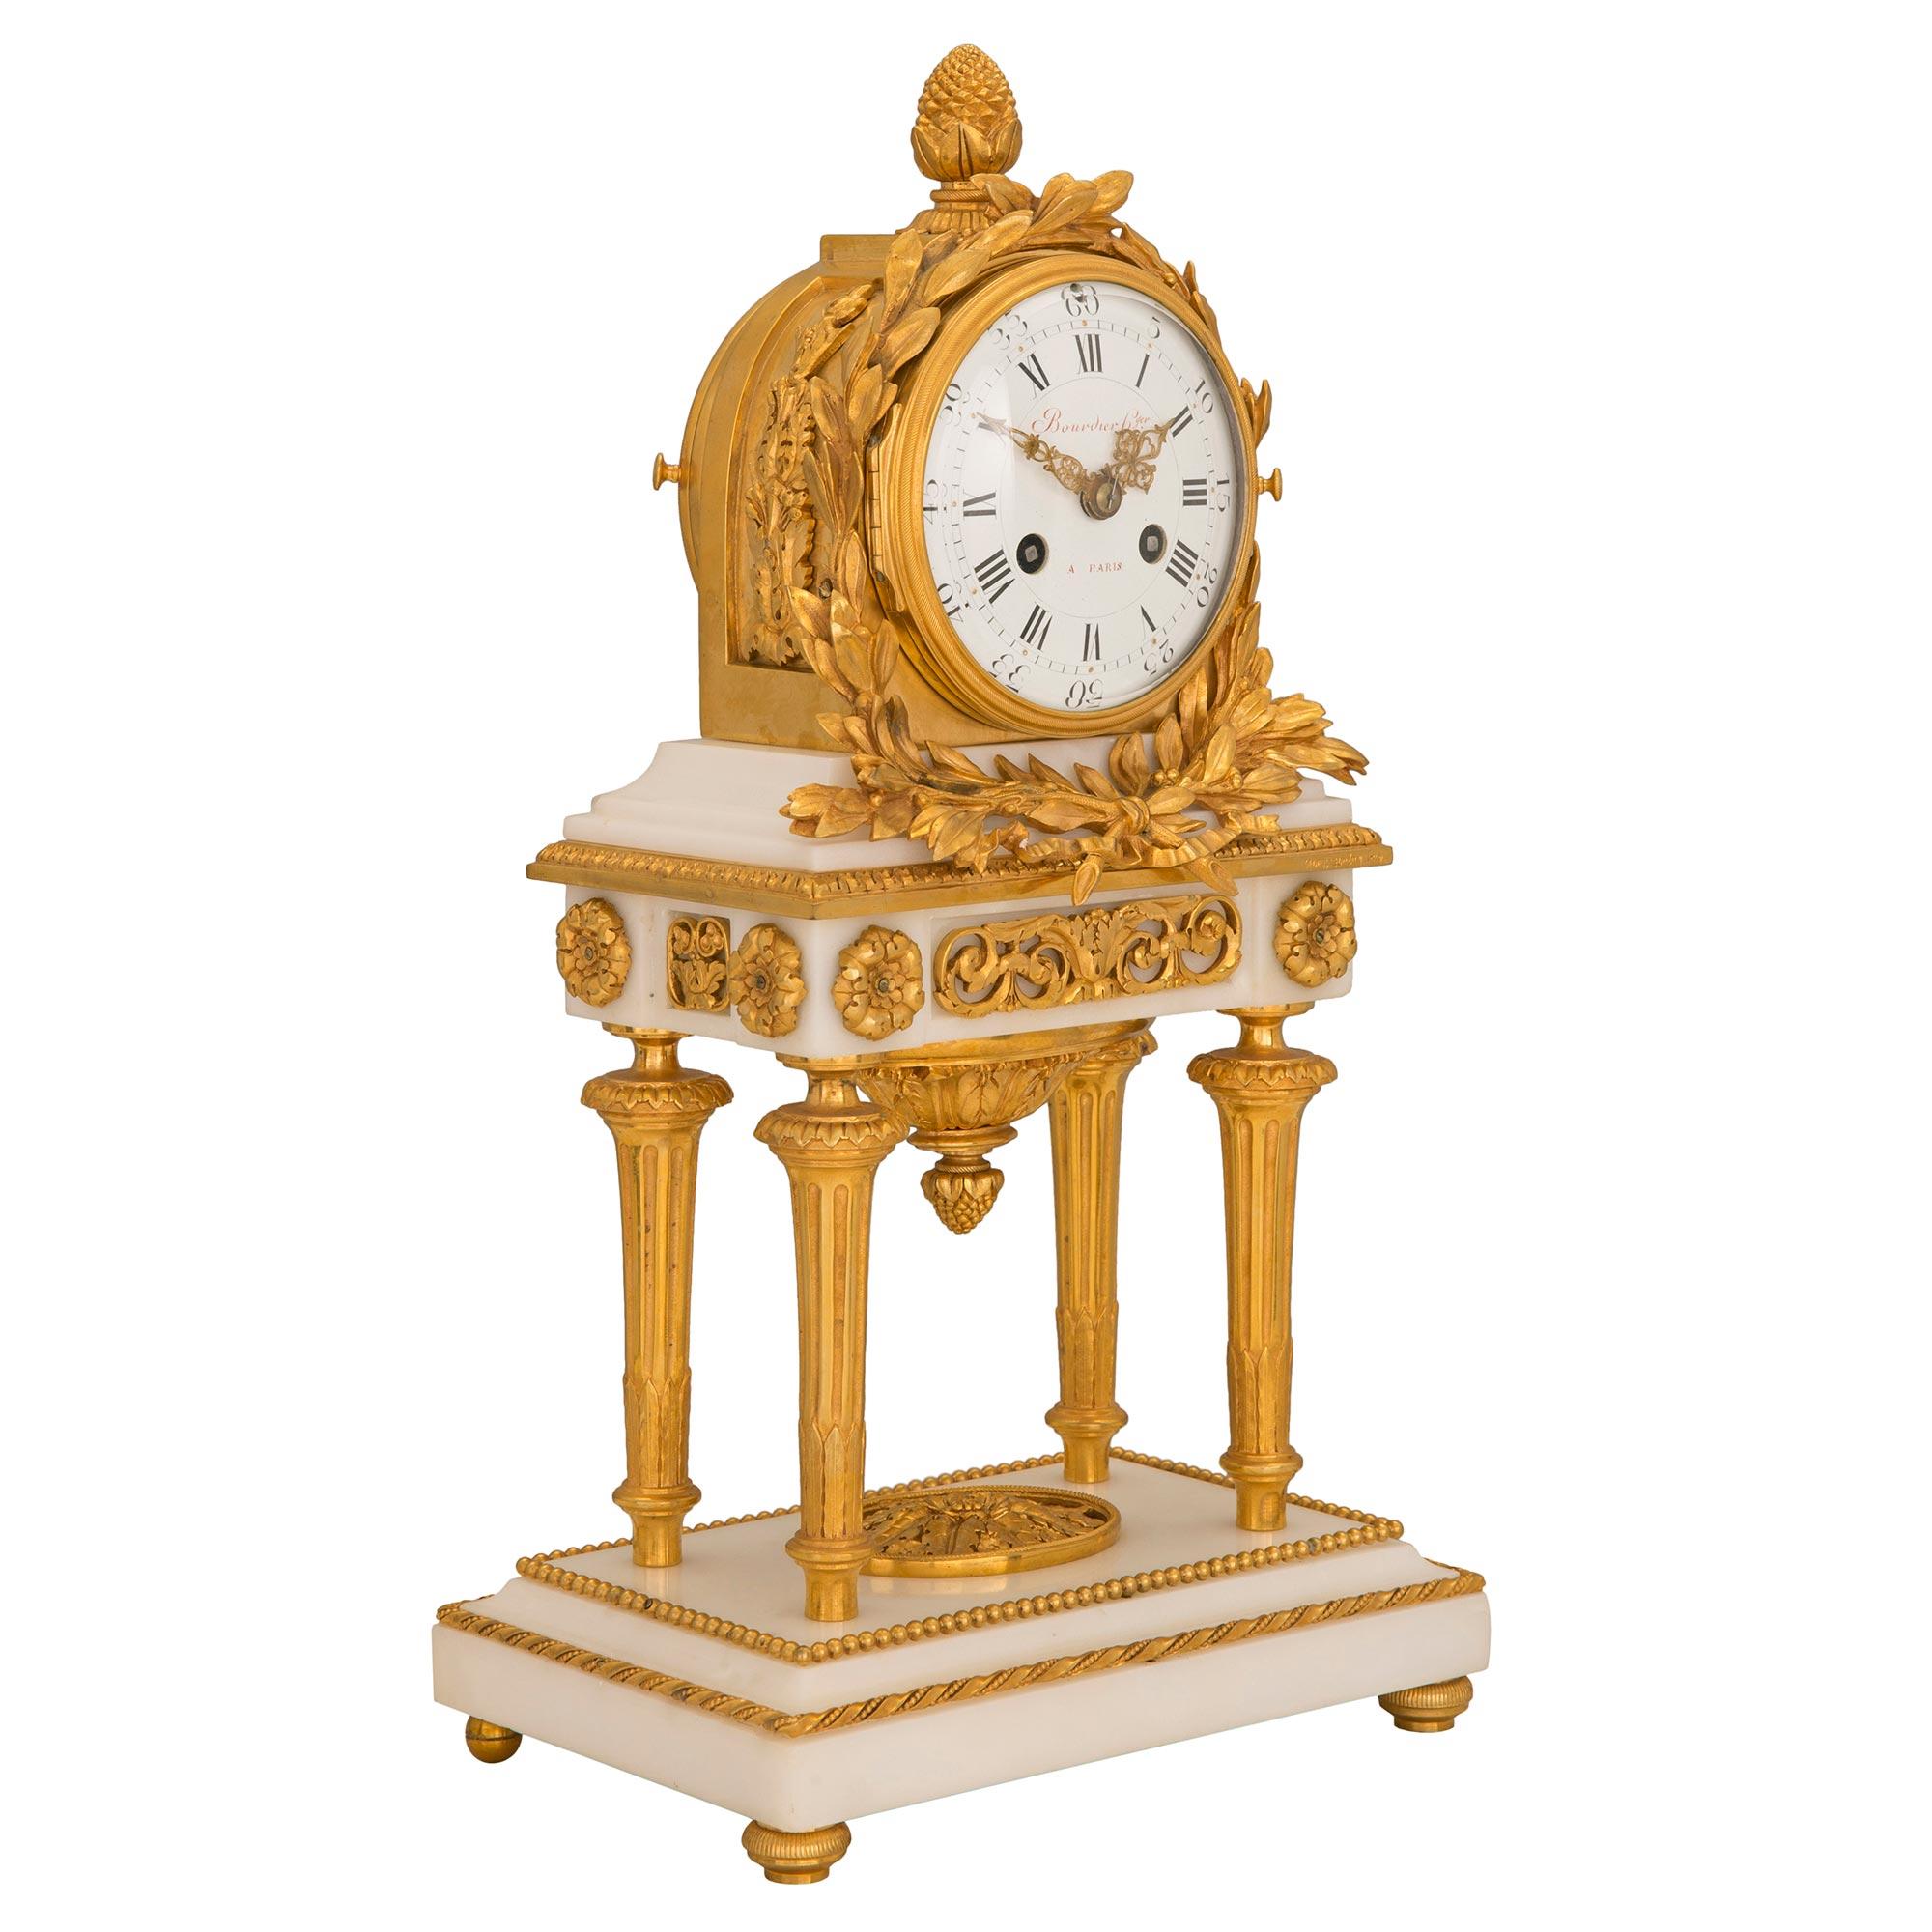 A striking and high quality French 18th century Louis XVI period white Carrara marble and ormolu garniture clock set signed by Jean-Simon Bourdier. The clock is raised by elegant mottled reeded feet below the rectangular white Carrara marble base